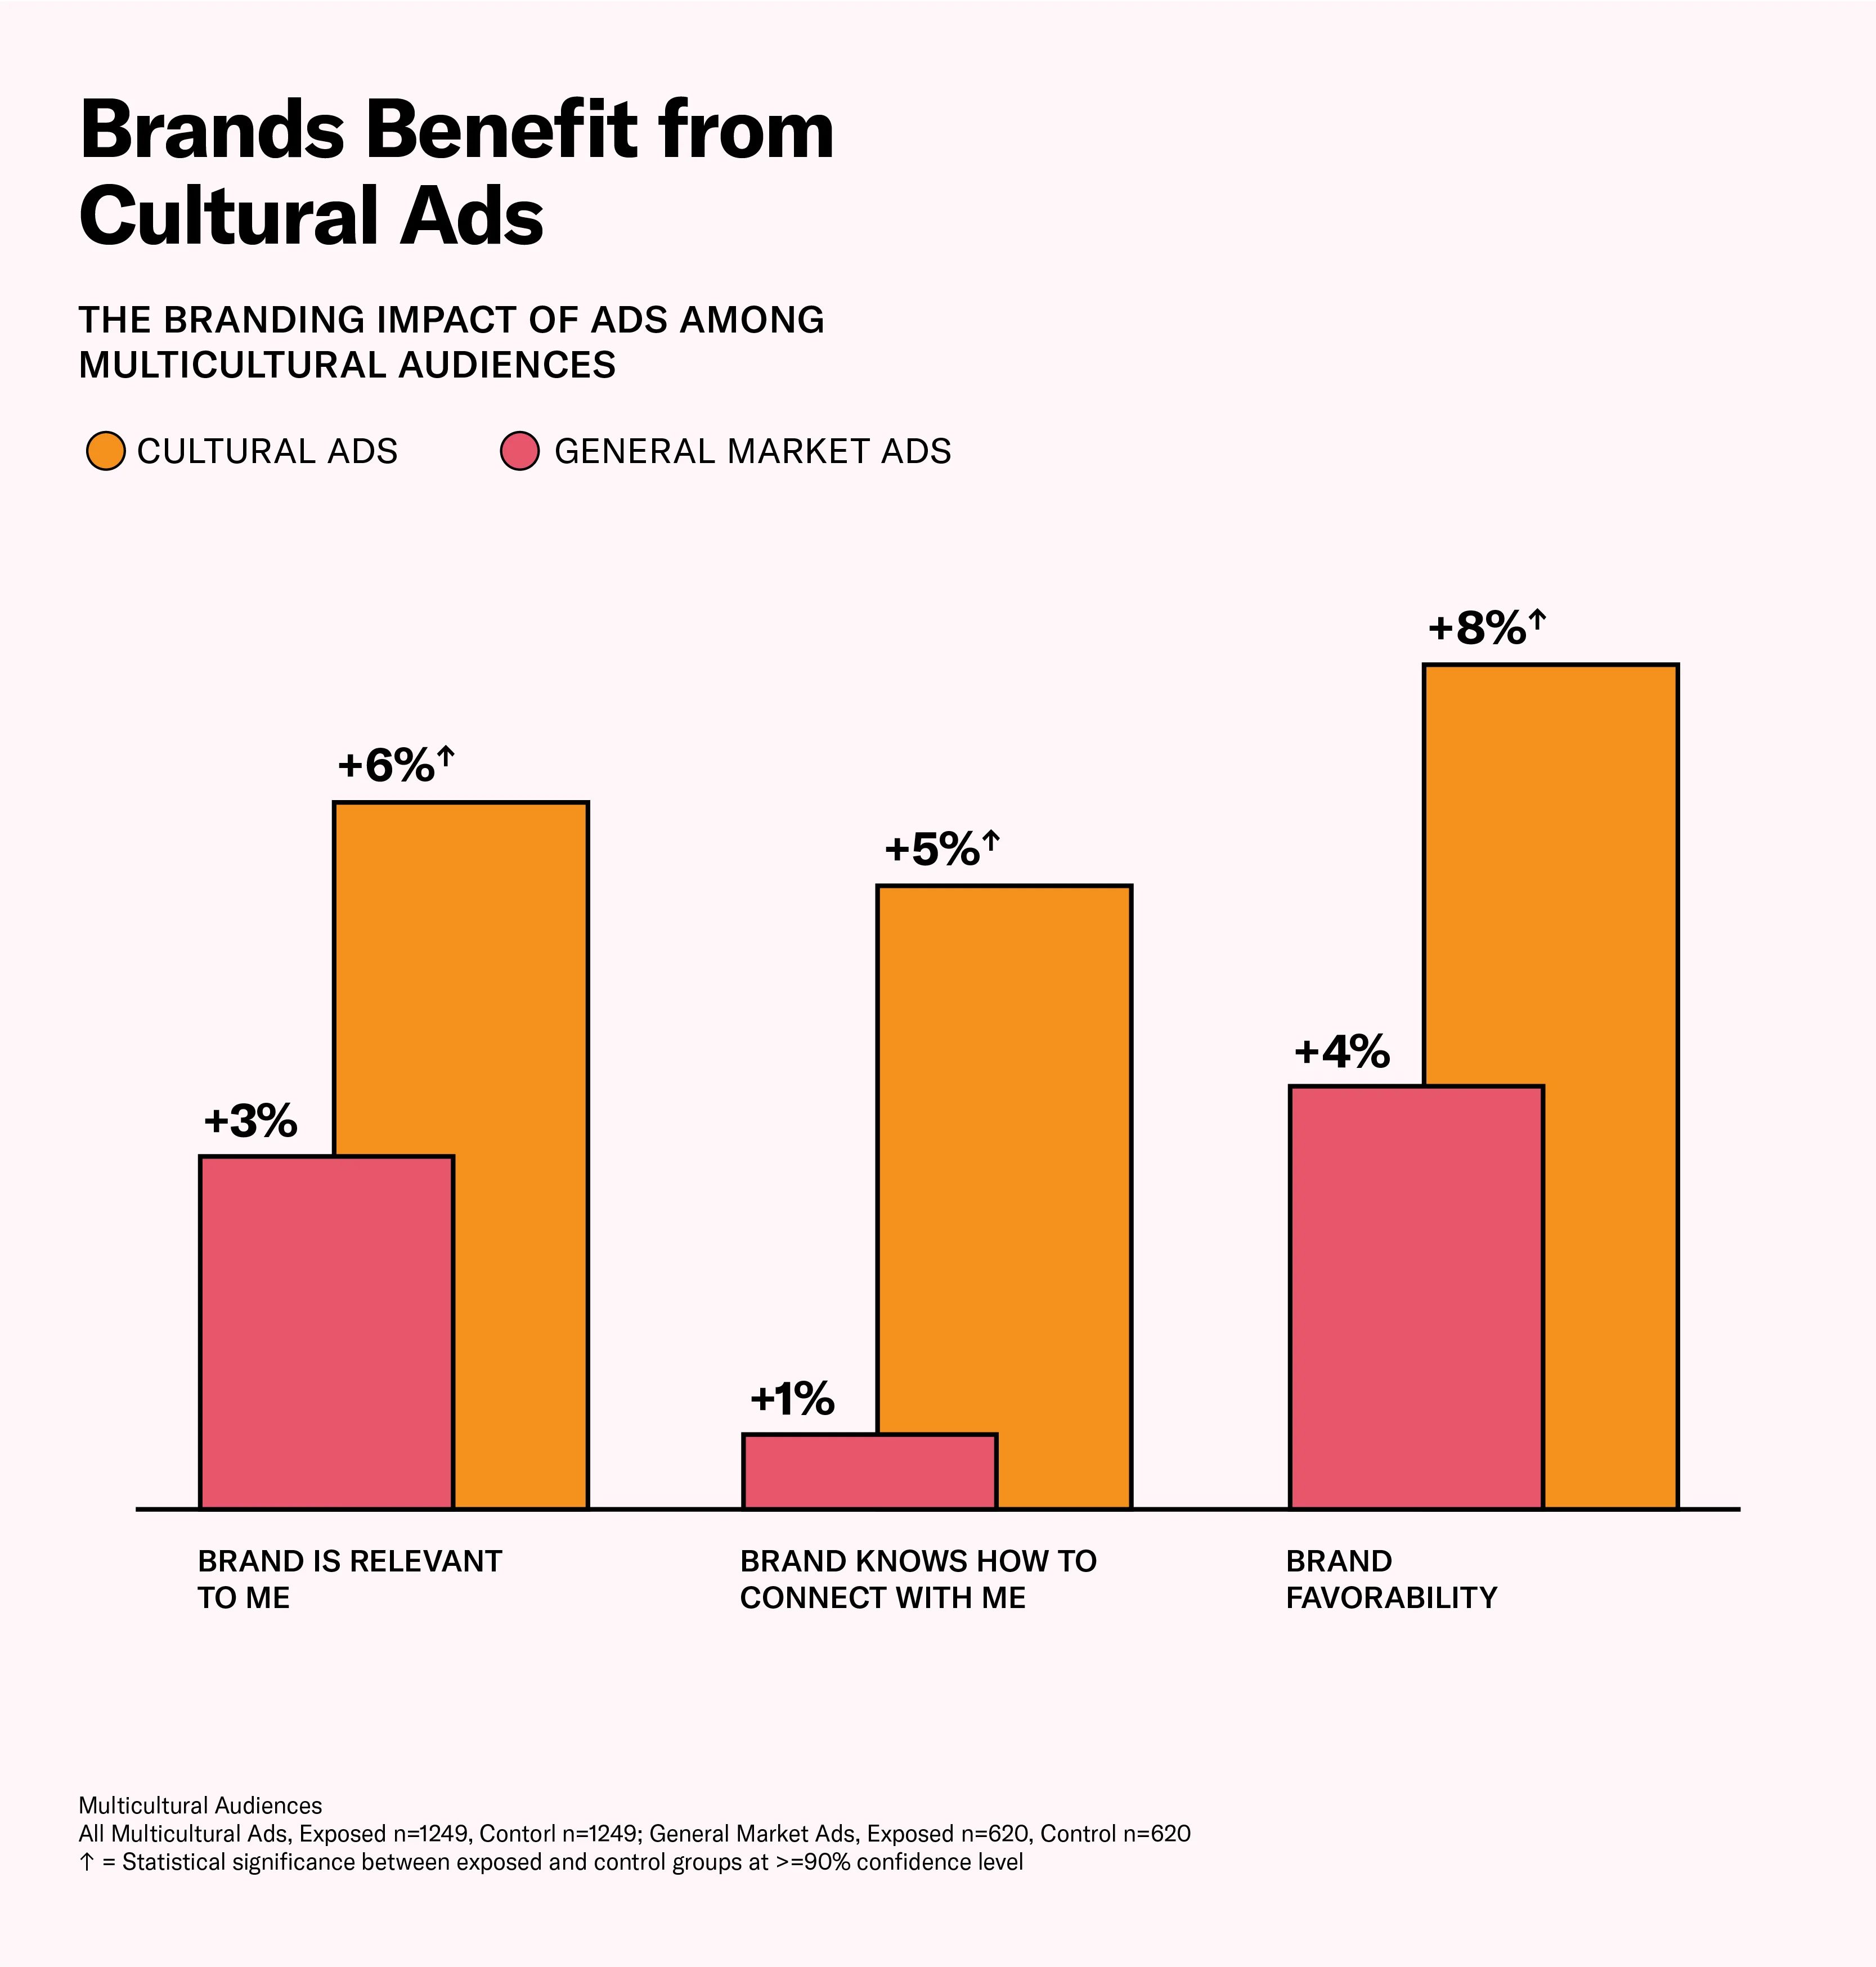 The branding impact of ads among multicultural audiences